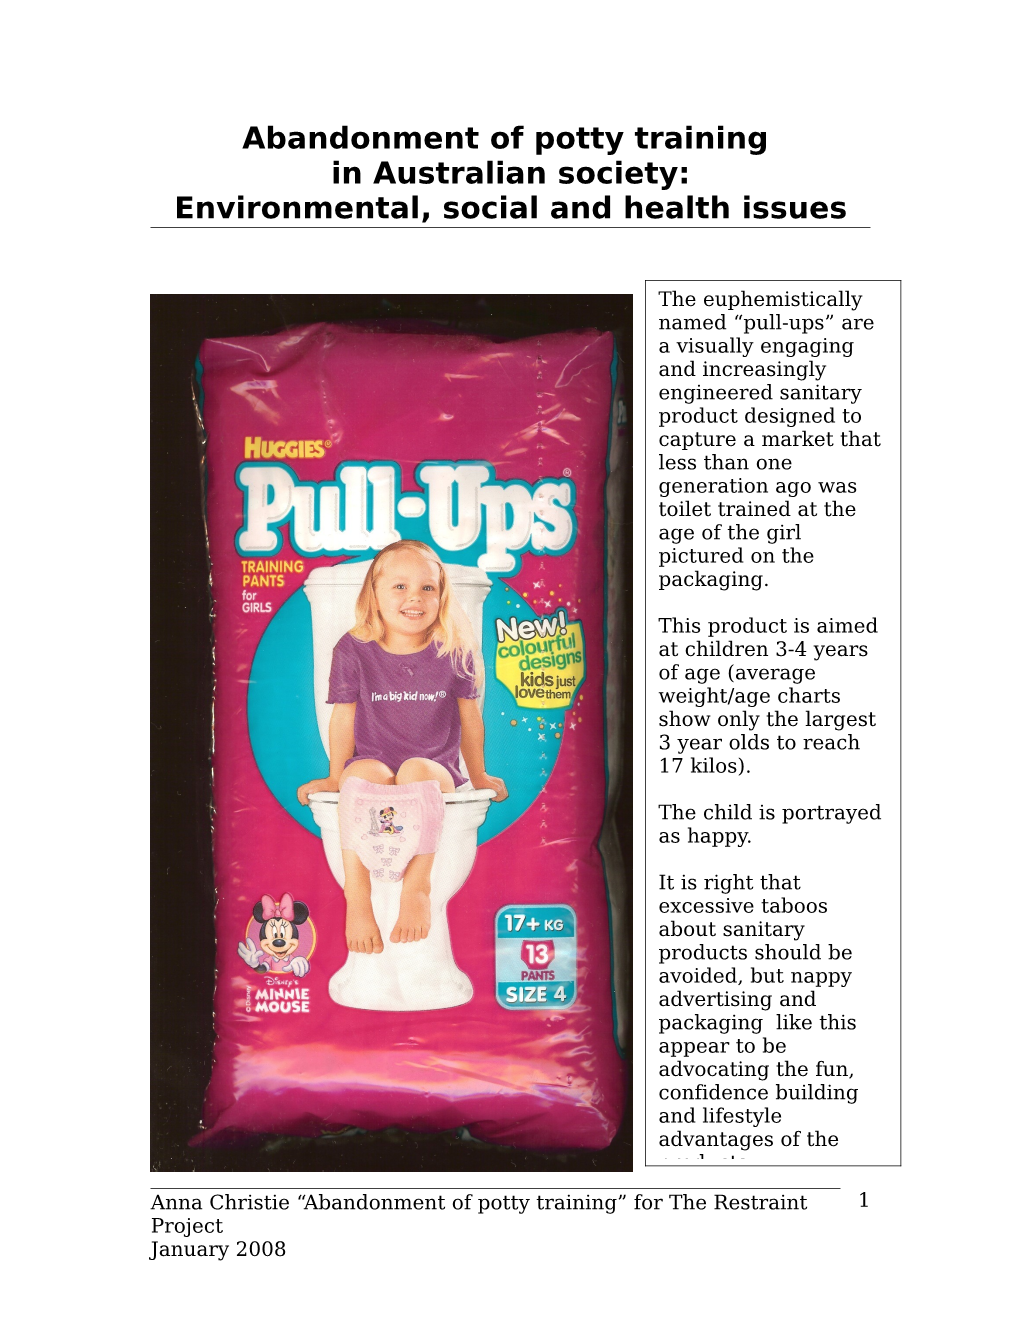 Abandonment of Potty Training in Australian Society: Environmental, Social and Health Issues